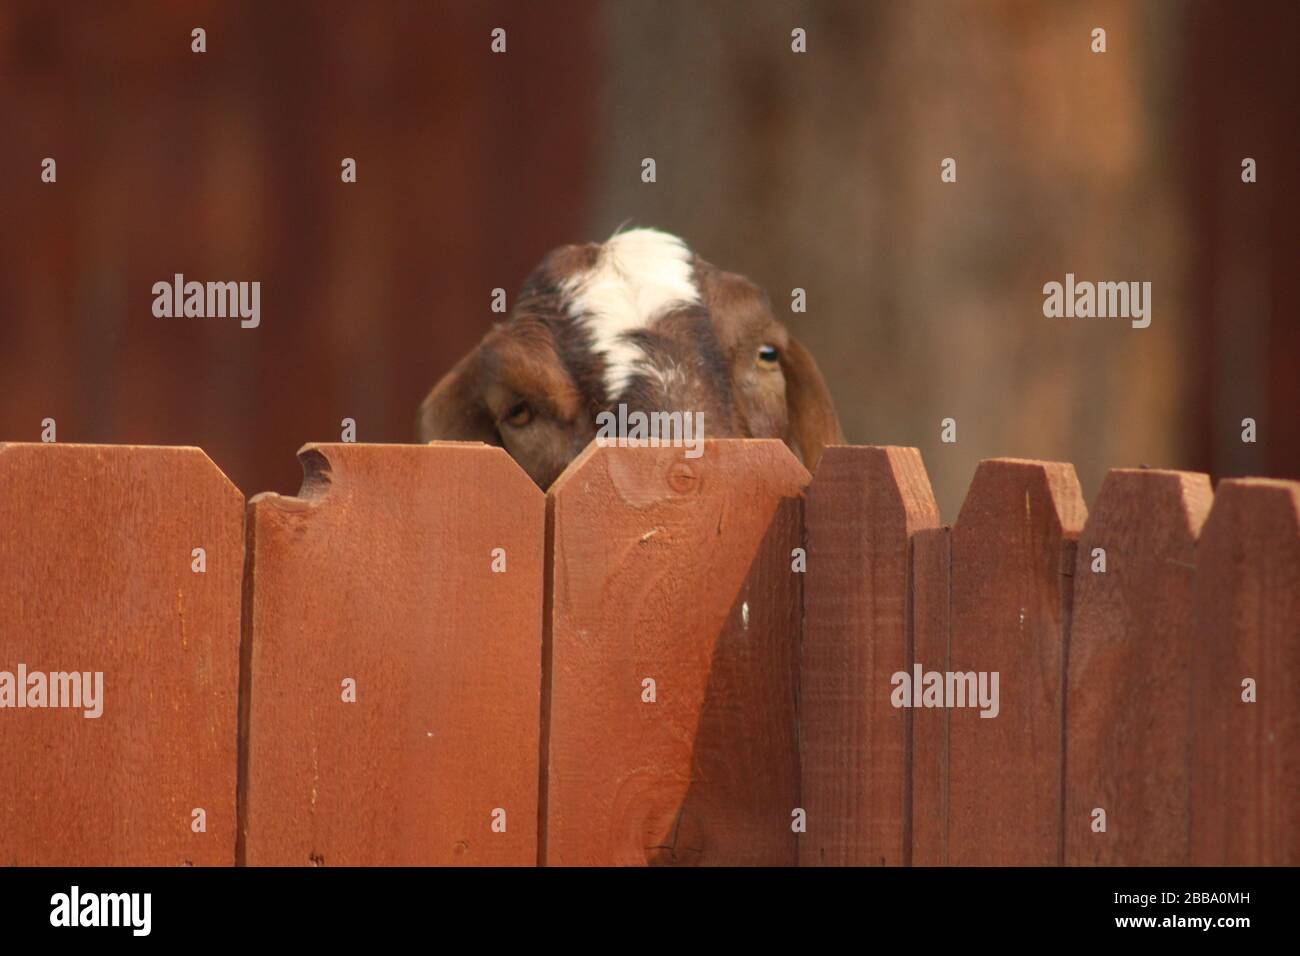 Goat looking over wooden fence Stock Photo